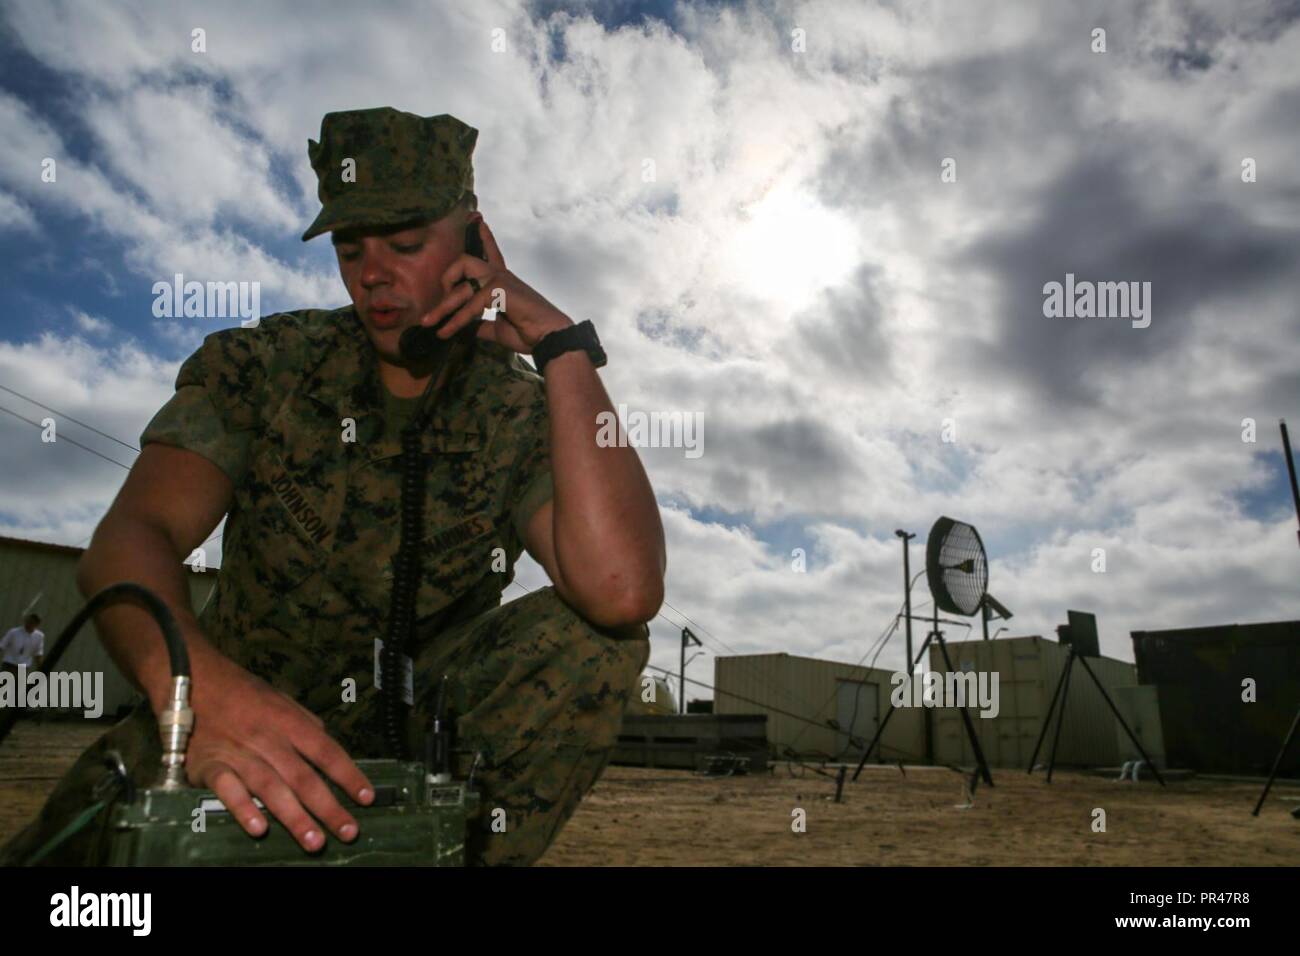 U.S. Marine Corps Lance Cpl. Bryce Johnson, a radio operator with Special  Purpose Marine Air-Ground Task Force Crisis Response Central Command 19.1,  tests a radio connection during a command post exercise on